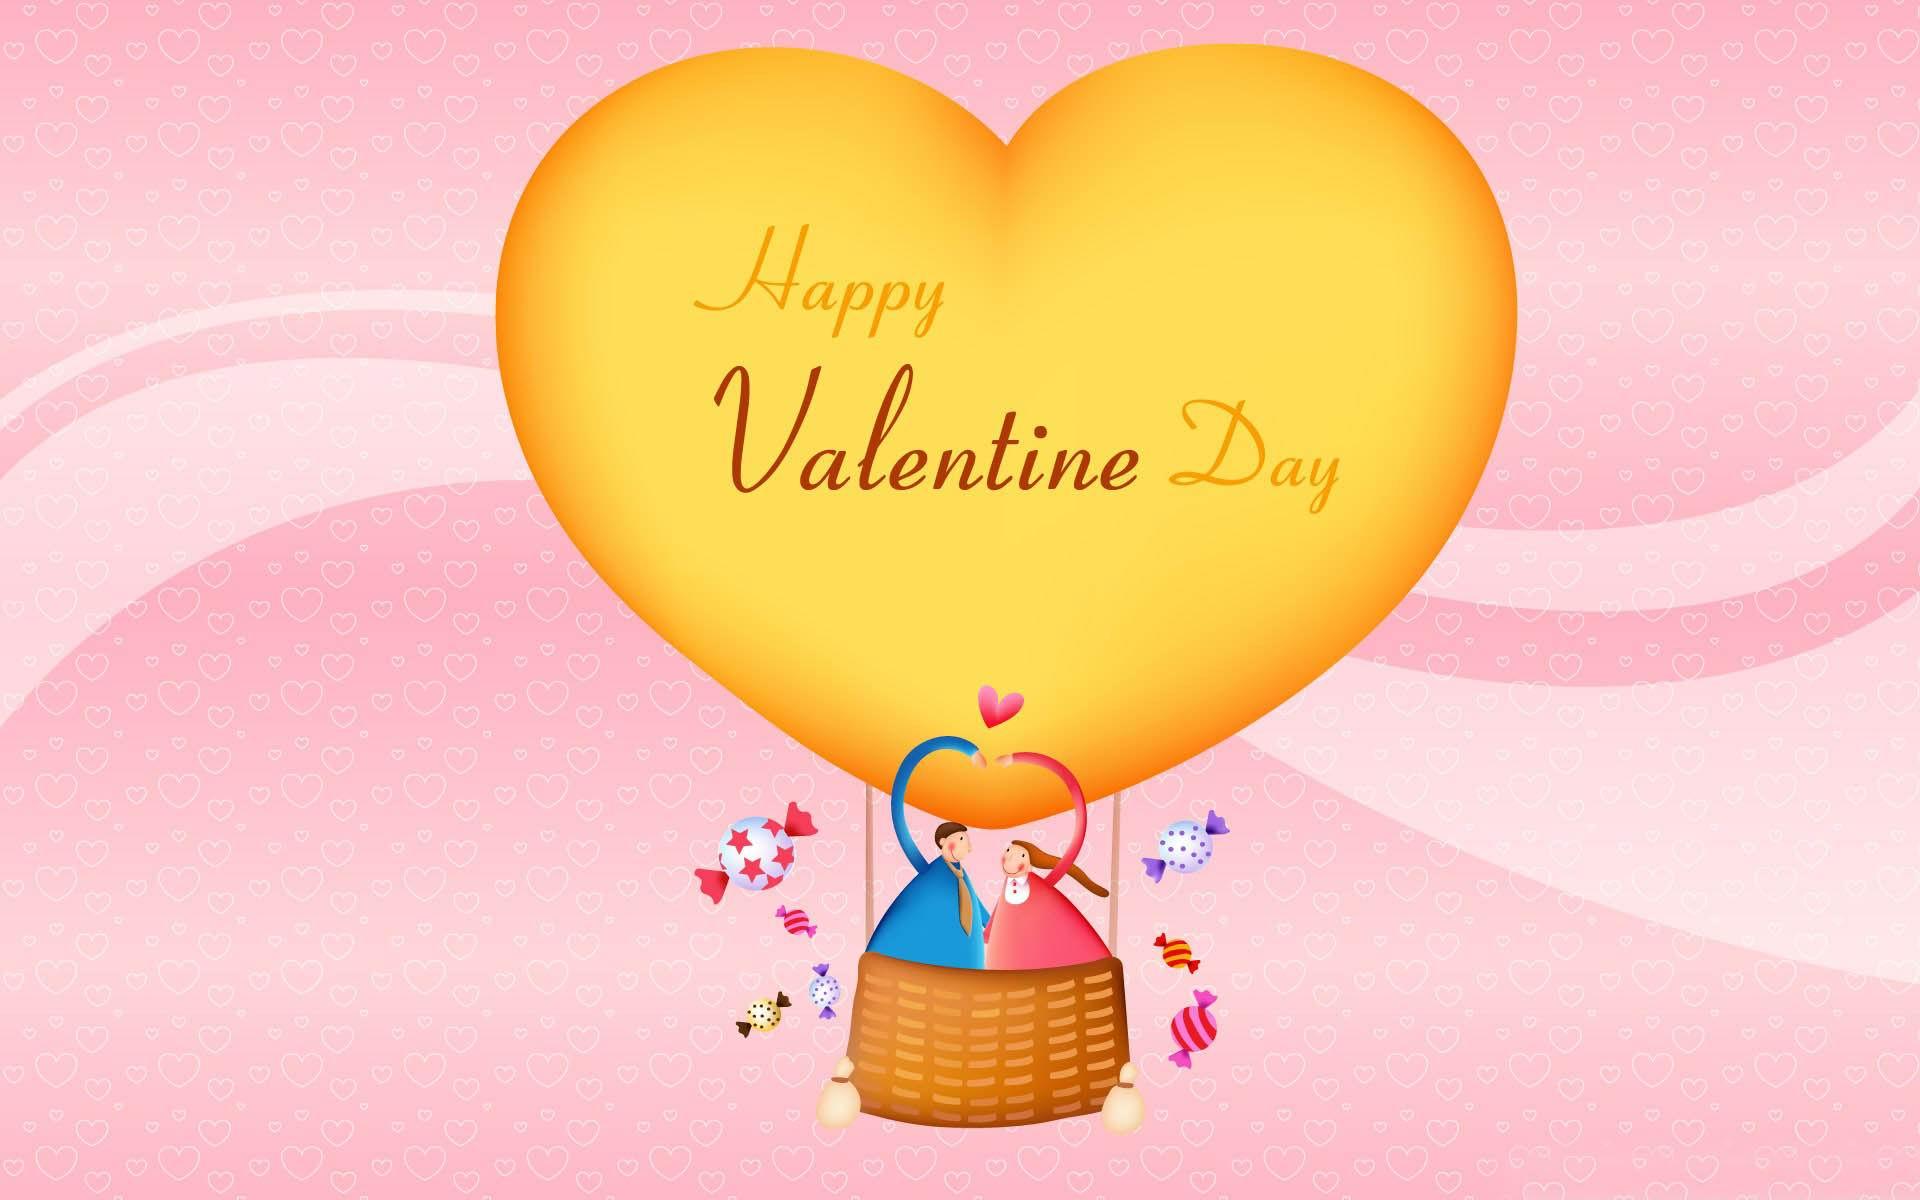 Cute Happy Valentines Day Quotes, HD Wallpaper & Picture